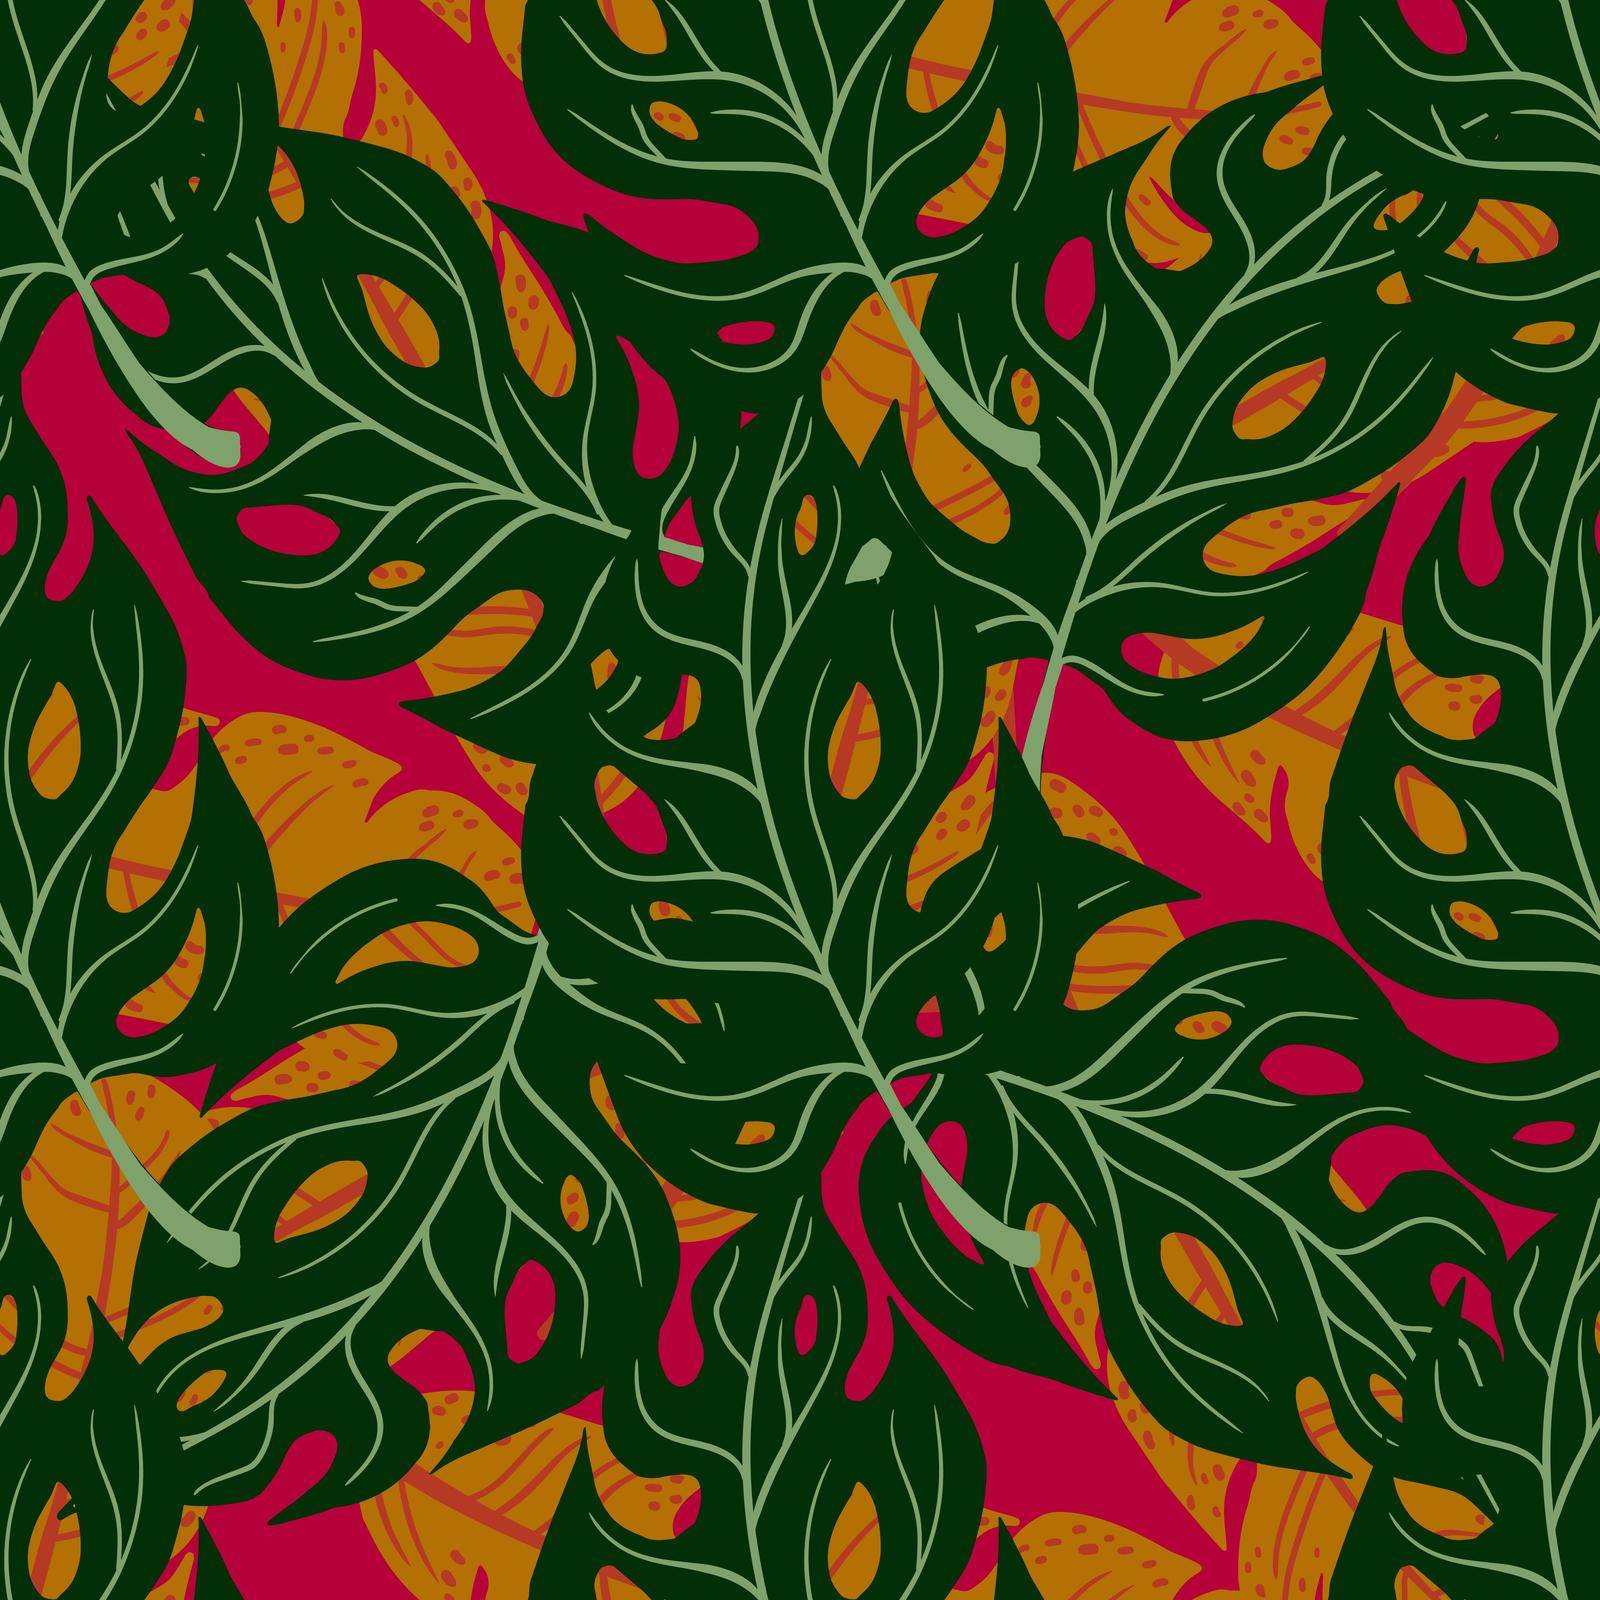 Tropical Leaves Hand drawn Vector Textile Seamless Pattern Design. by iliris